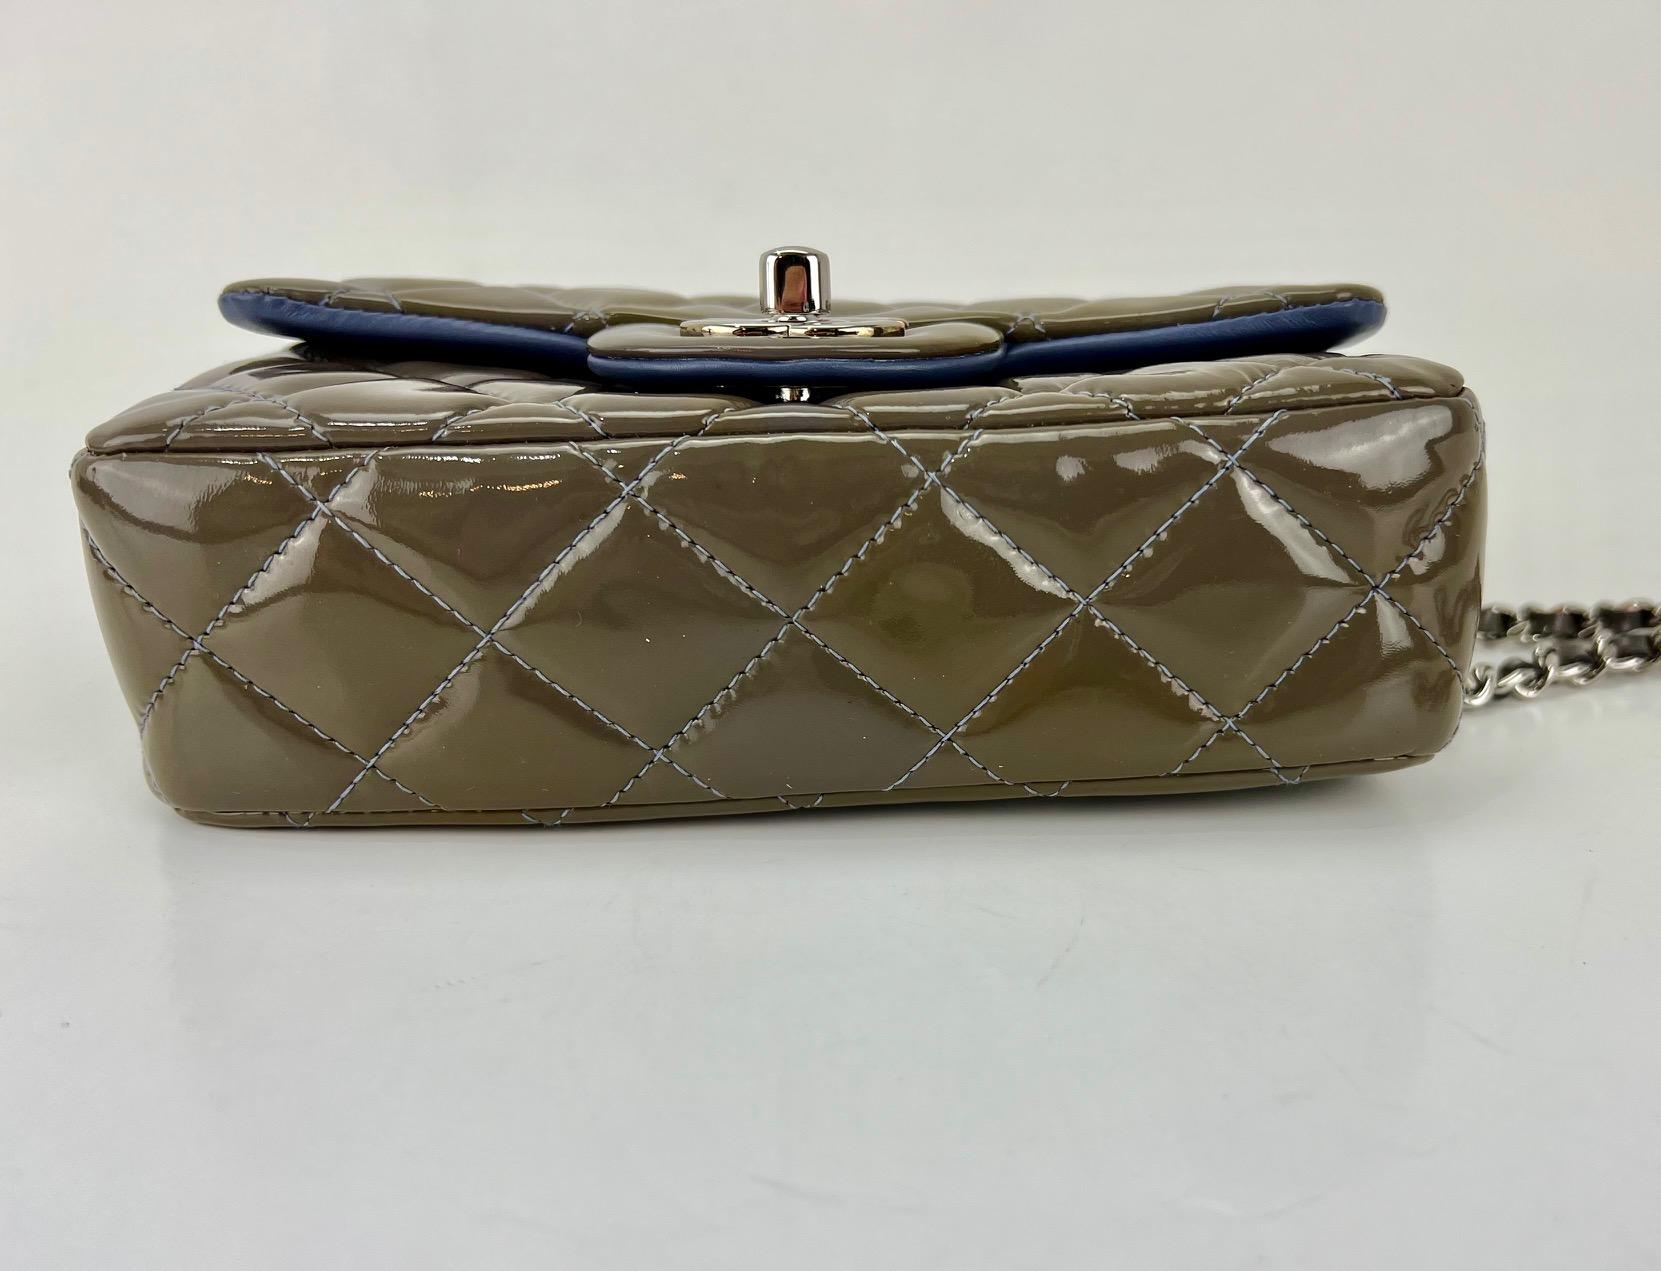 Pre-Owned  100% Authentic
CHANEL Patent Calfskin Quilted mini
Rectangular Flap Grey
RATING: B...Very Good, well maintained,
shows minor signs of wear
MATERIAL:  patent leather, leather
HANDLE:  leather woven into chain
DROP: 21.5 in
COLOR:  grey,